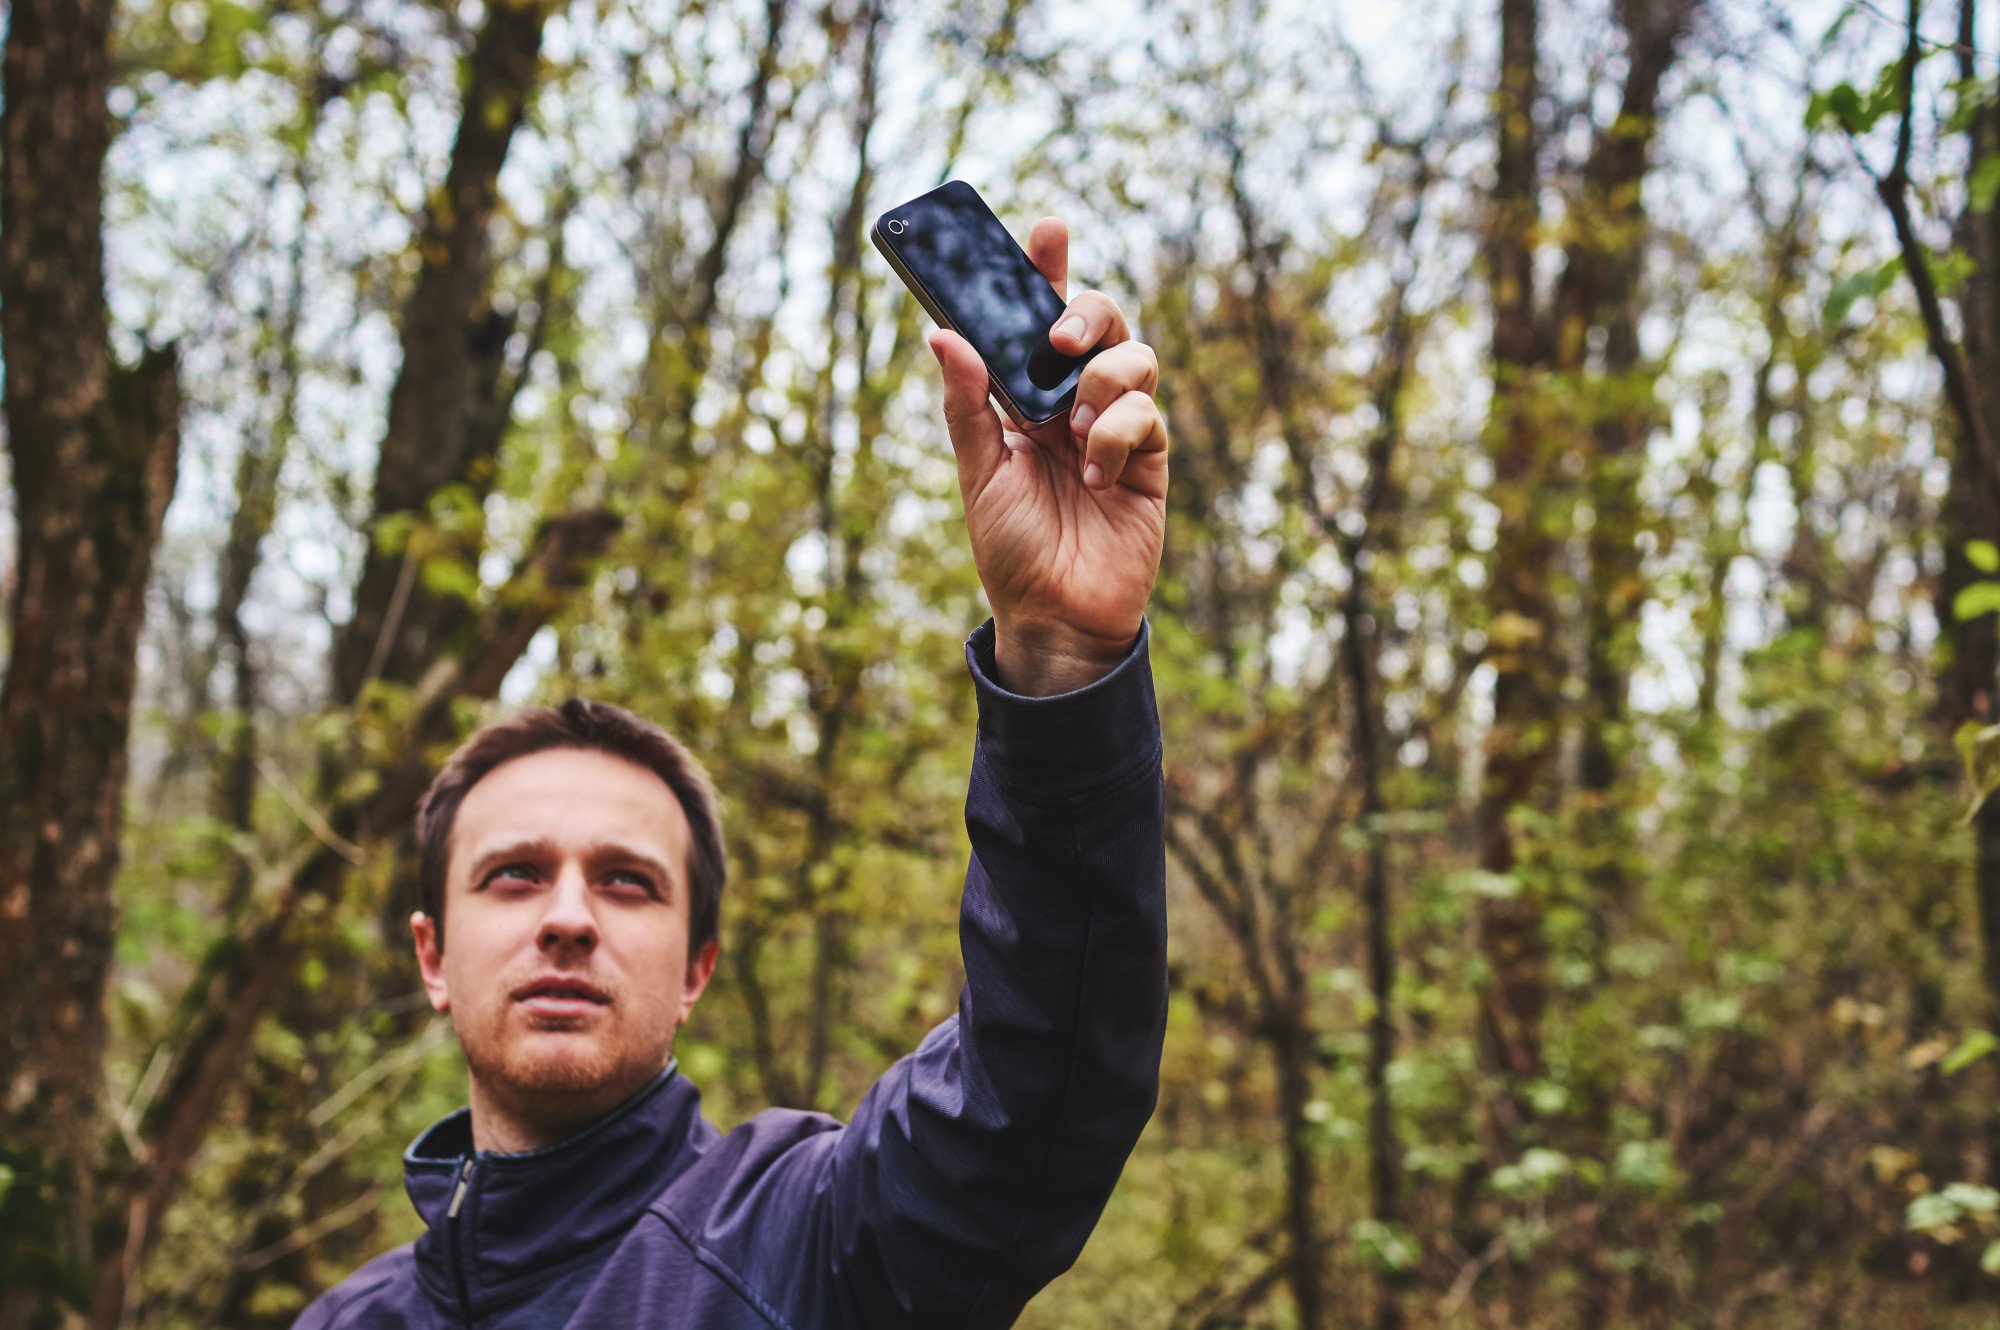 A man holds up his phone in the air in a remote area to try and get a better signal.